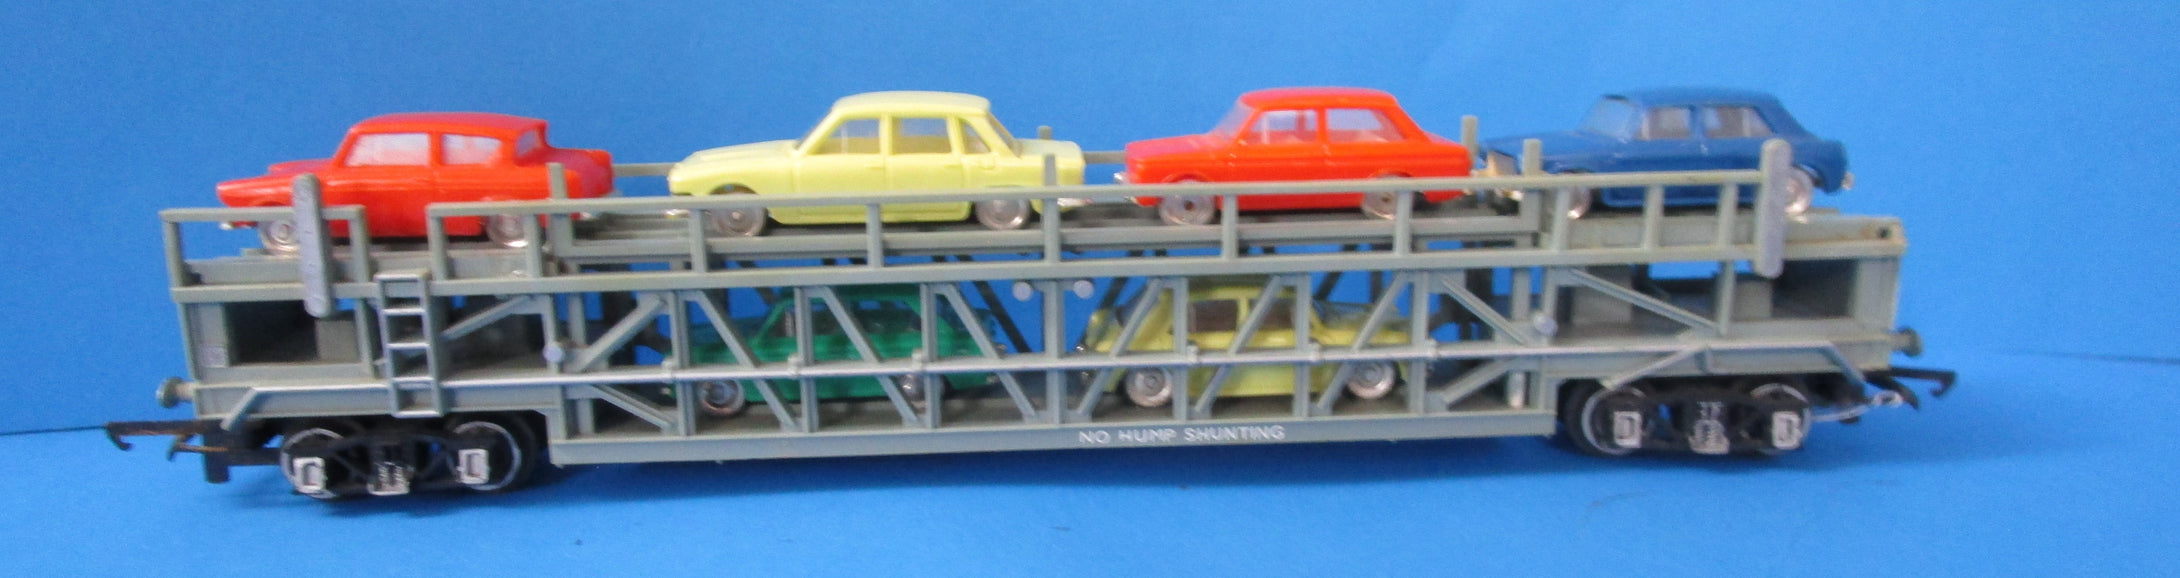 R342-P01 HORNBY BR Car Transporter with 6 cars - UNBOXED